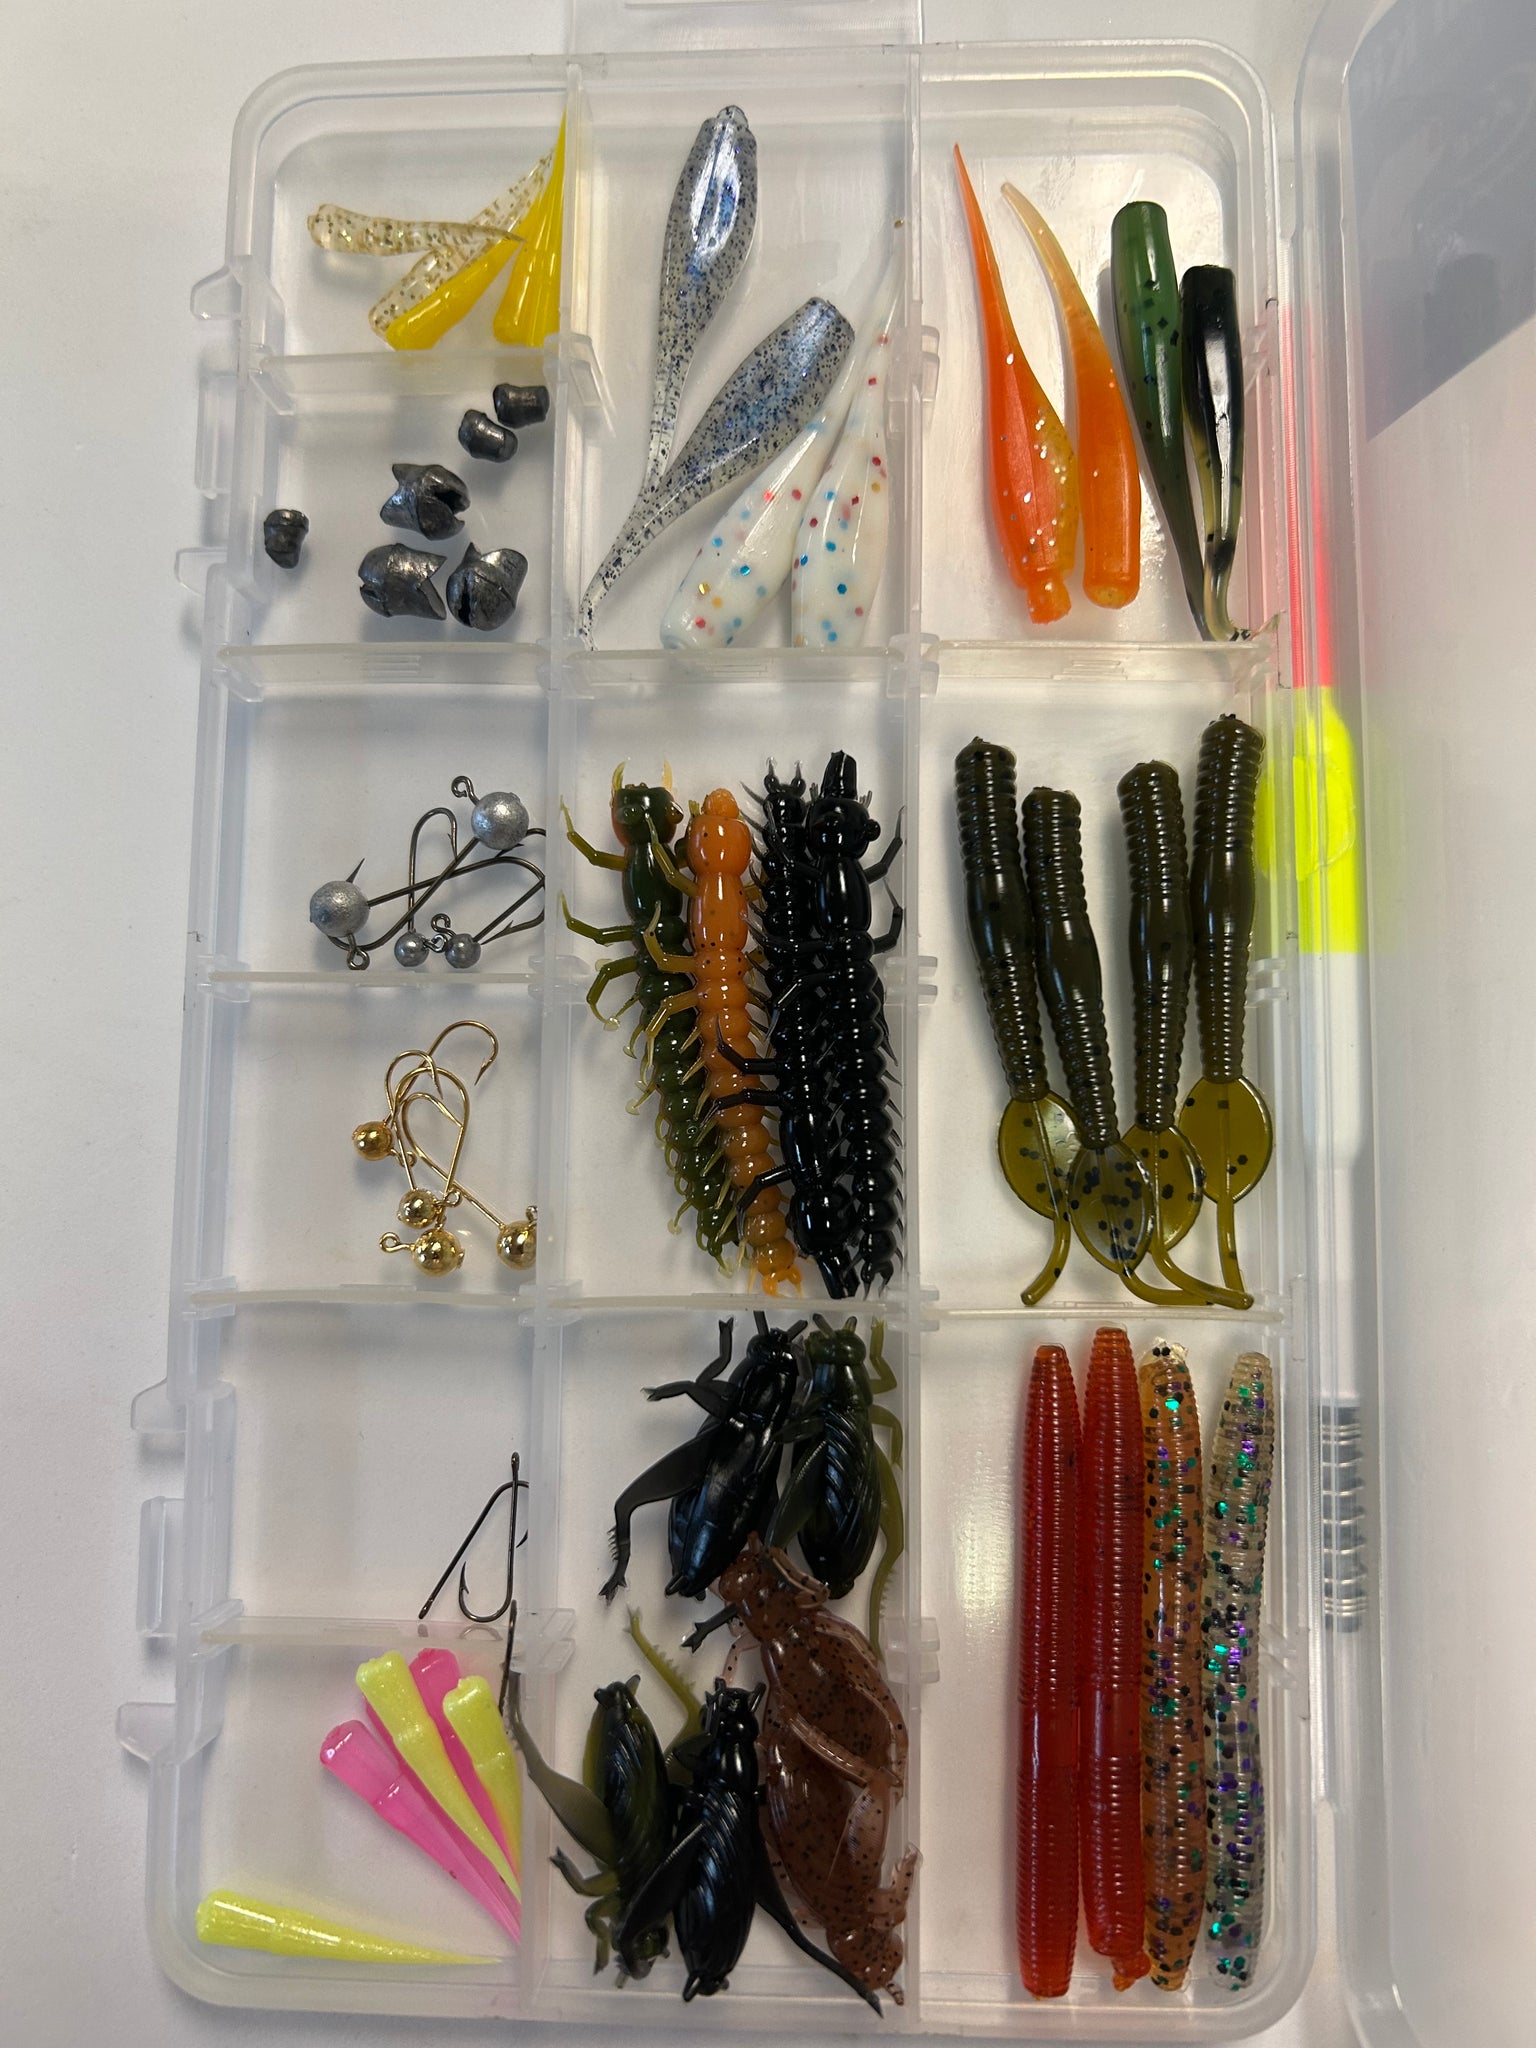 Fishing Lures Tackle Box Trout & Crappie Ice Fishing Palestine